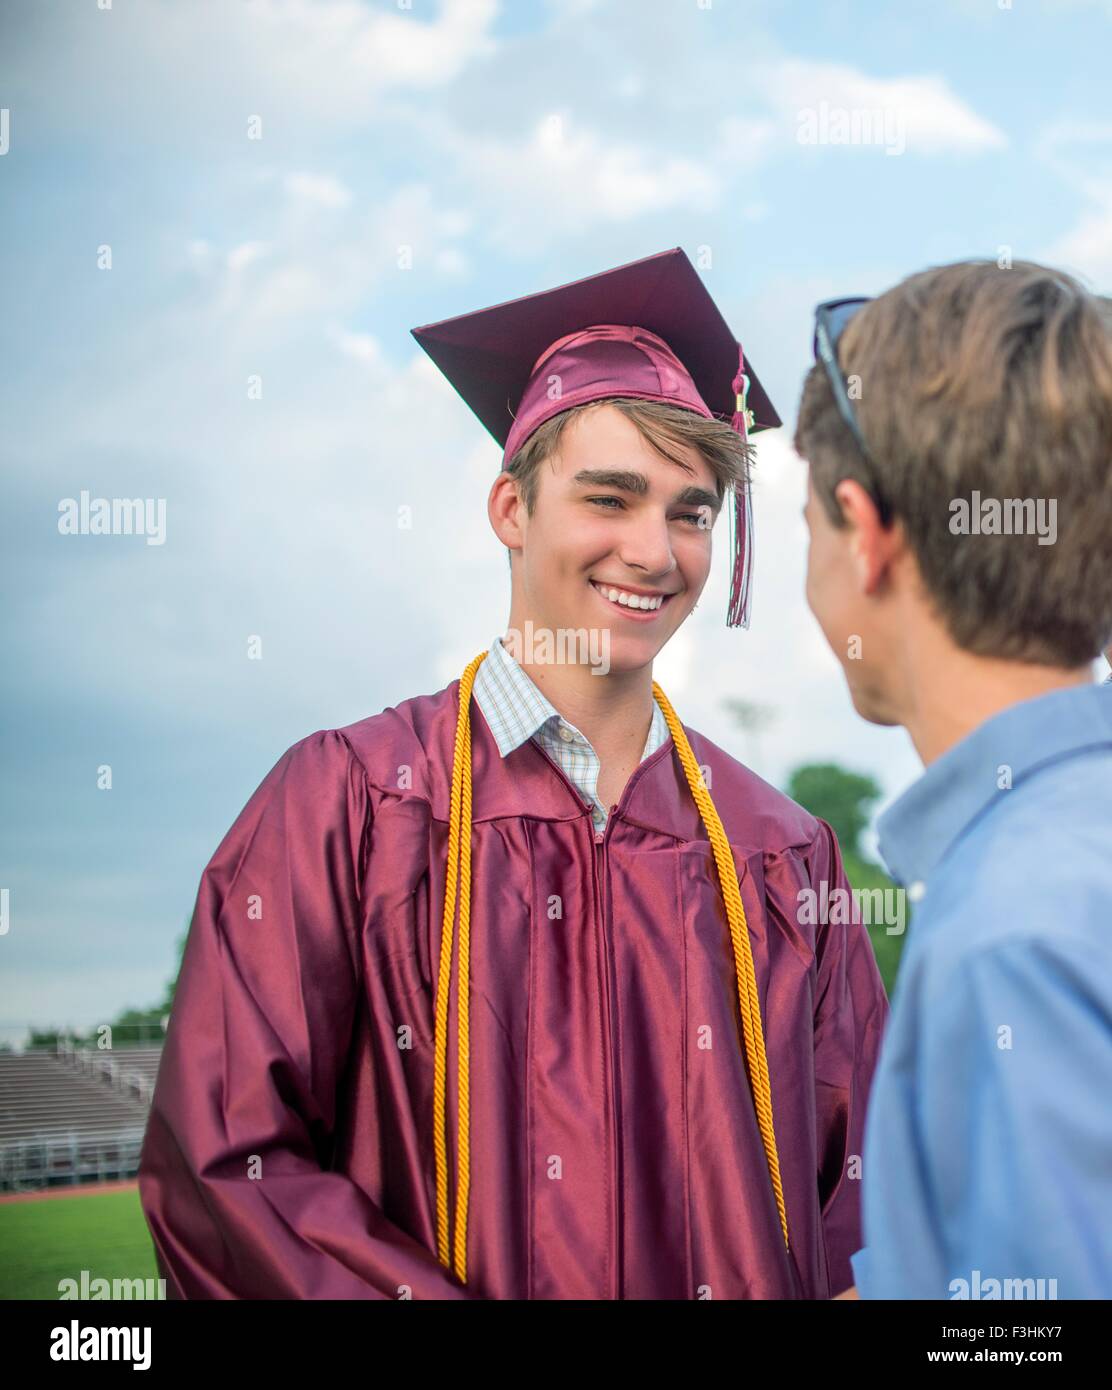 Young man with family memeber at graduation ceremony Stock Photo